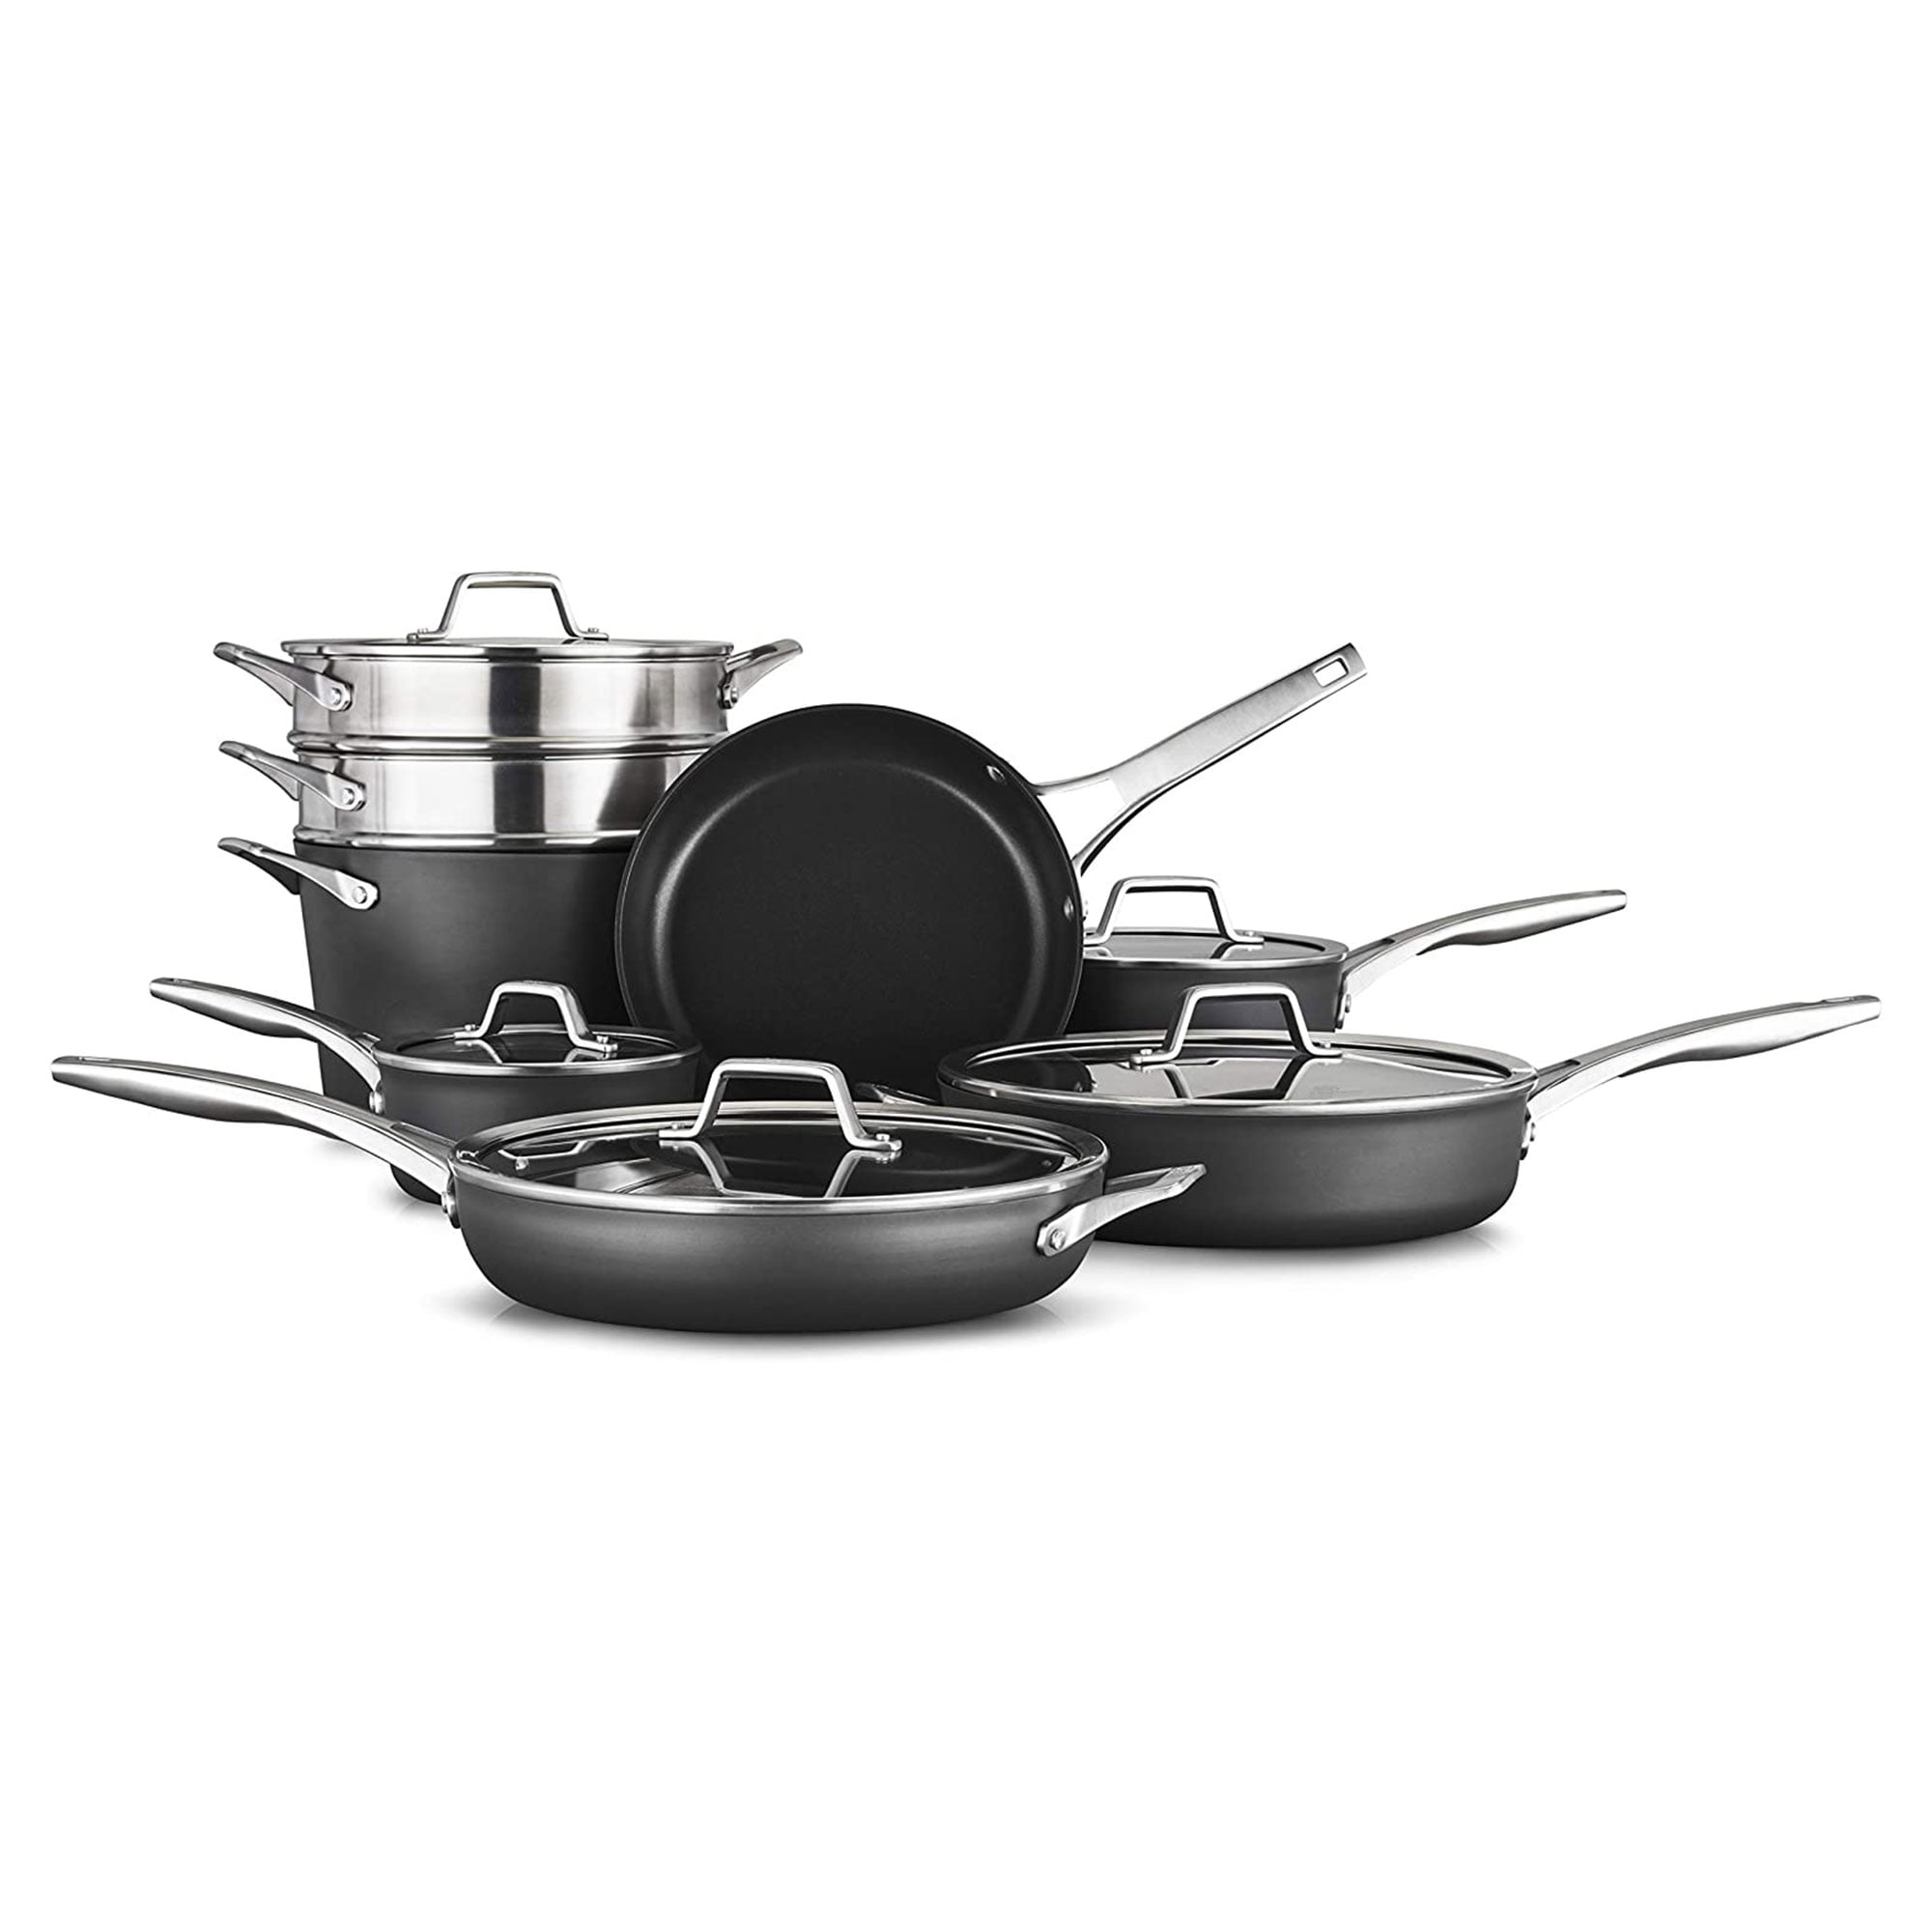 Calphalon 15-Piece Pots and Pans Set, Stackable Nonstick Kitchen Cookware  with Stay-Cool Stainless Steel Handles, Black